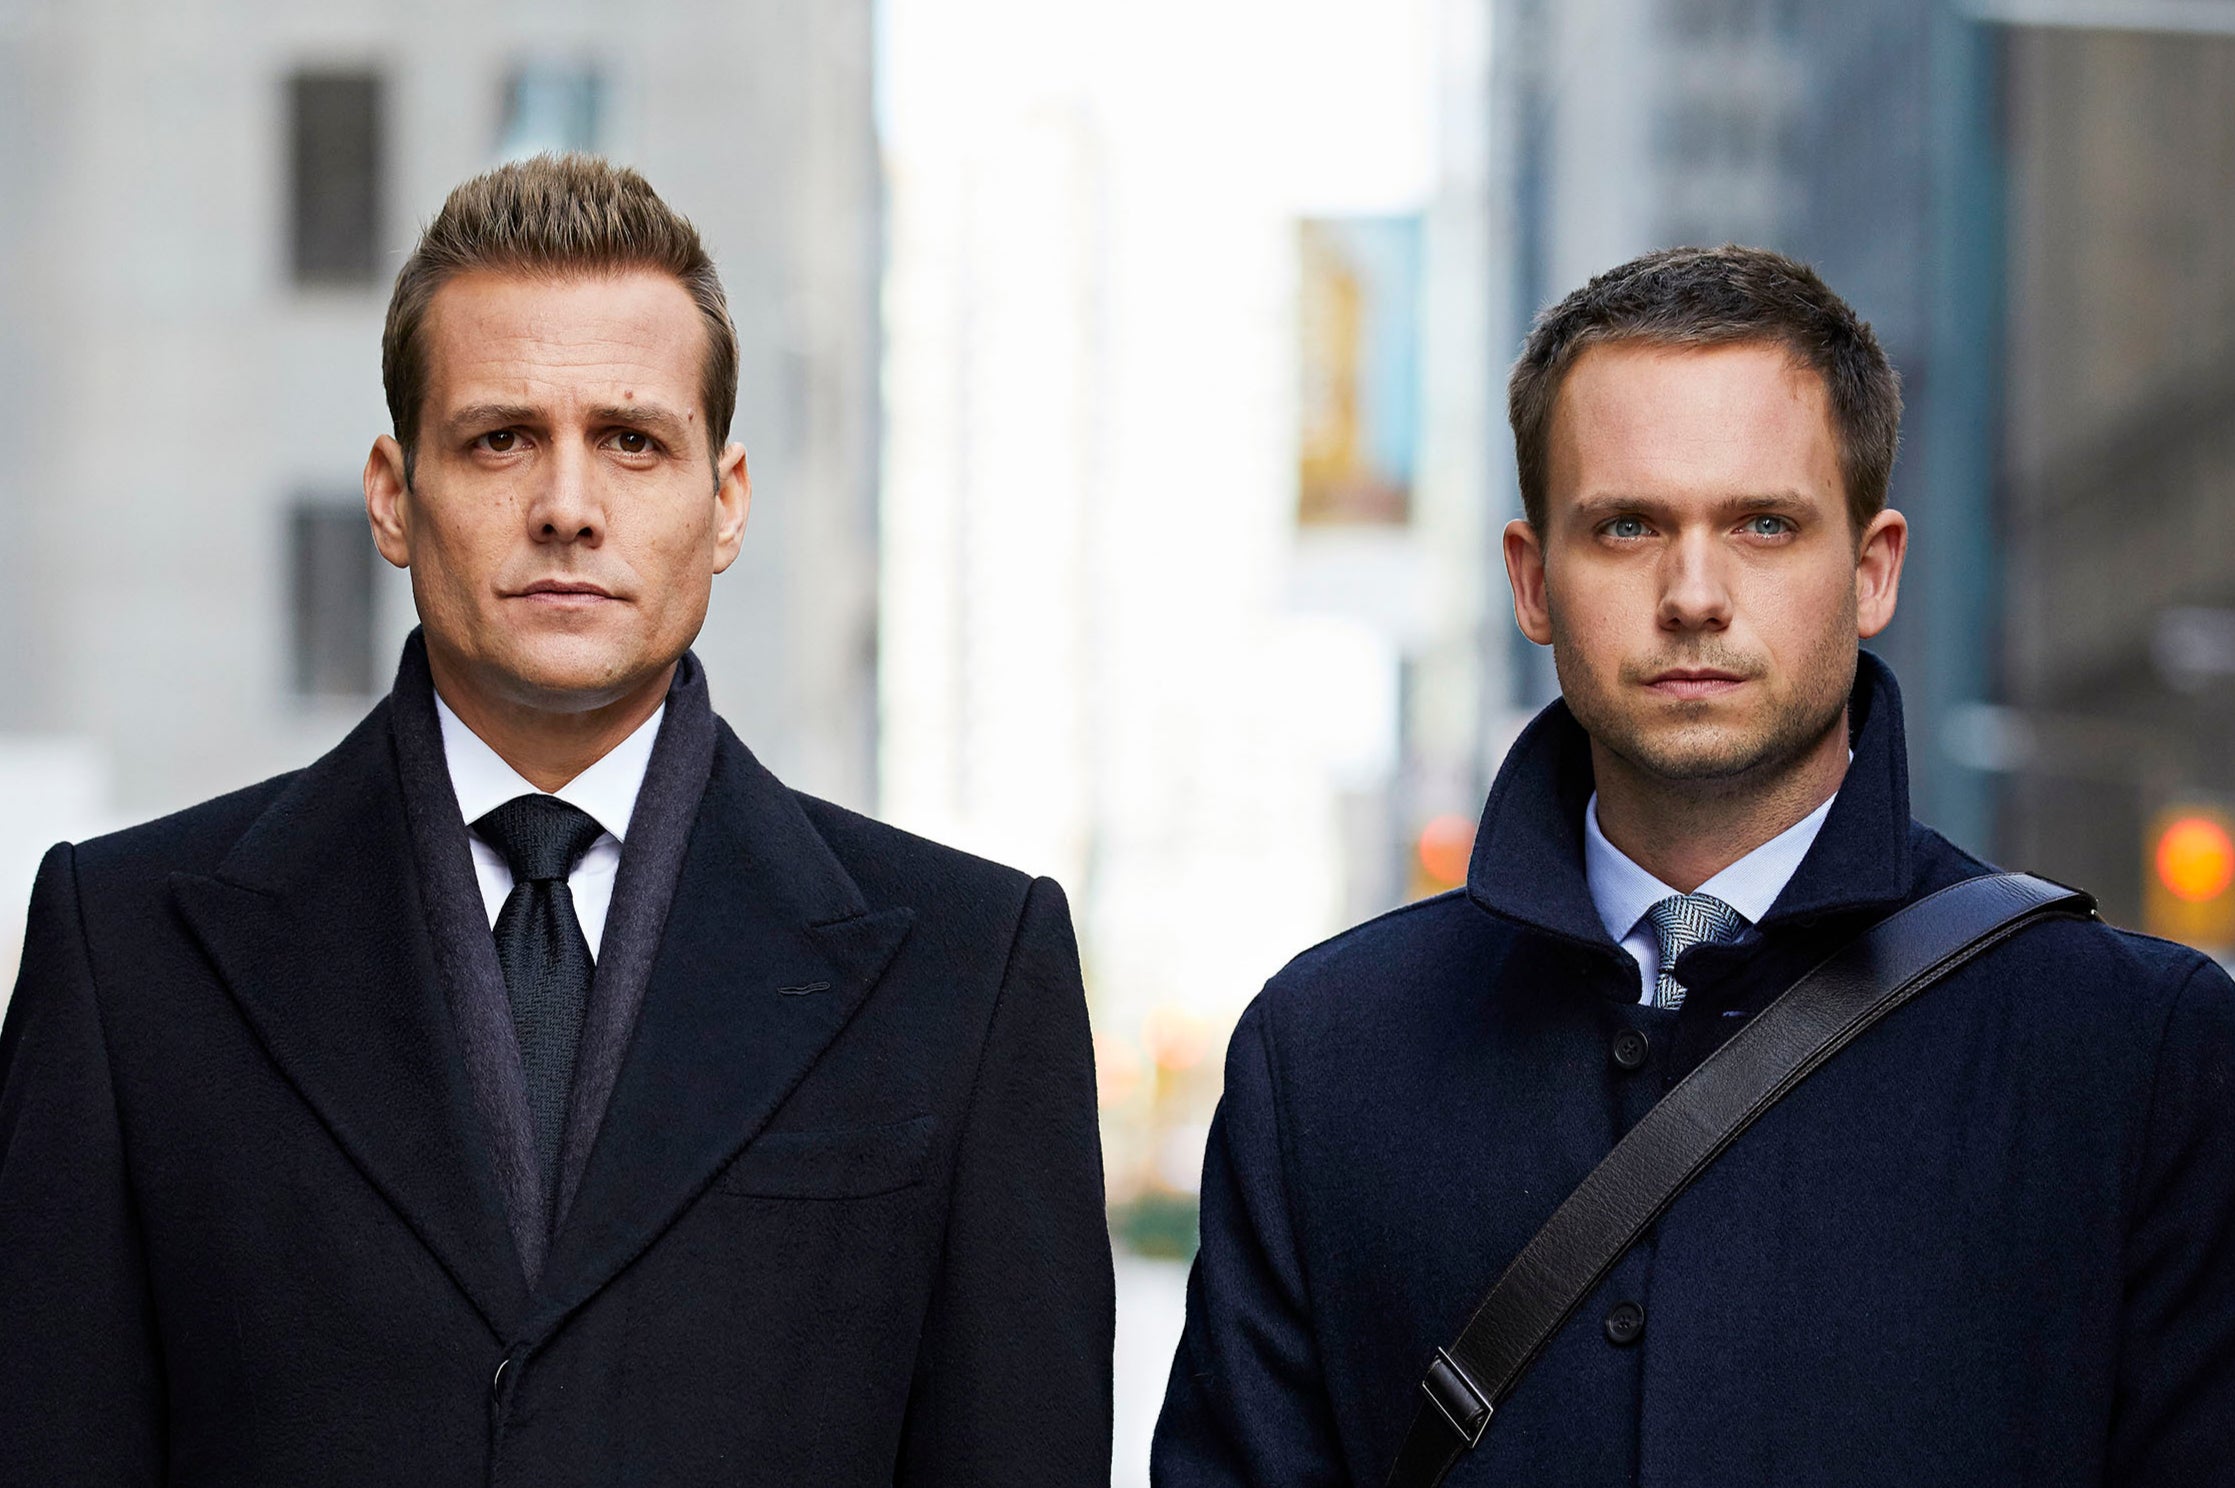 Harvey (Gabriel Macht) and Mike (Patrick J Adams) in Suits